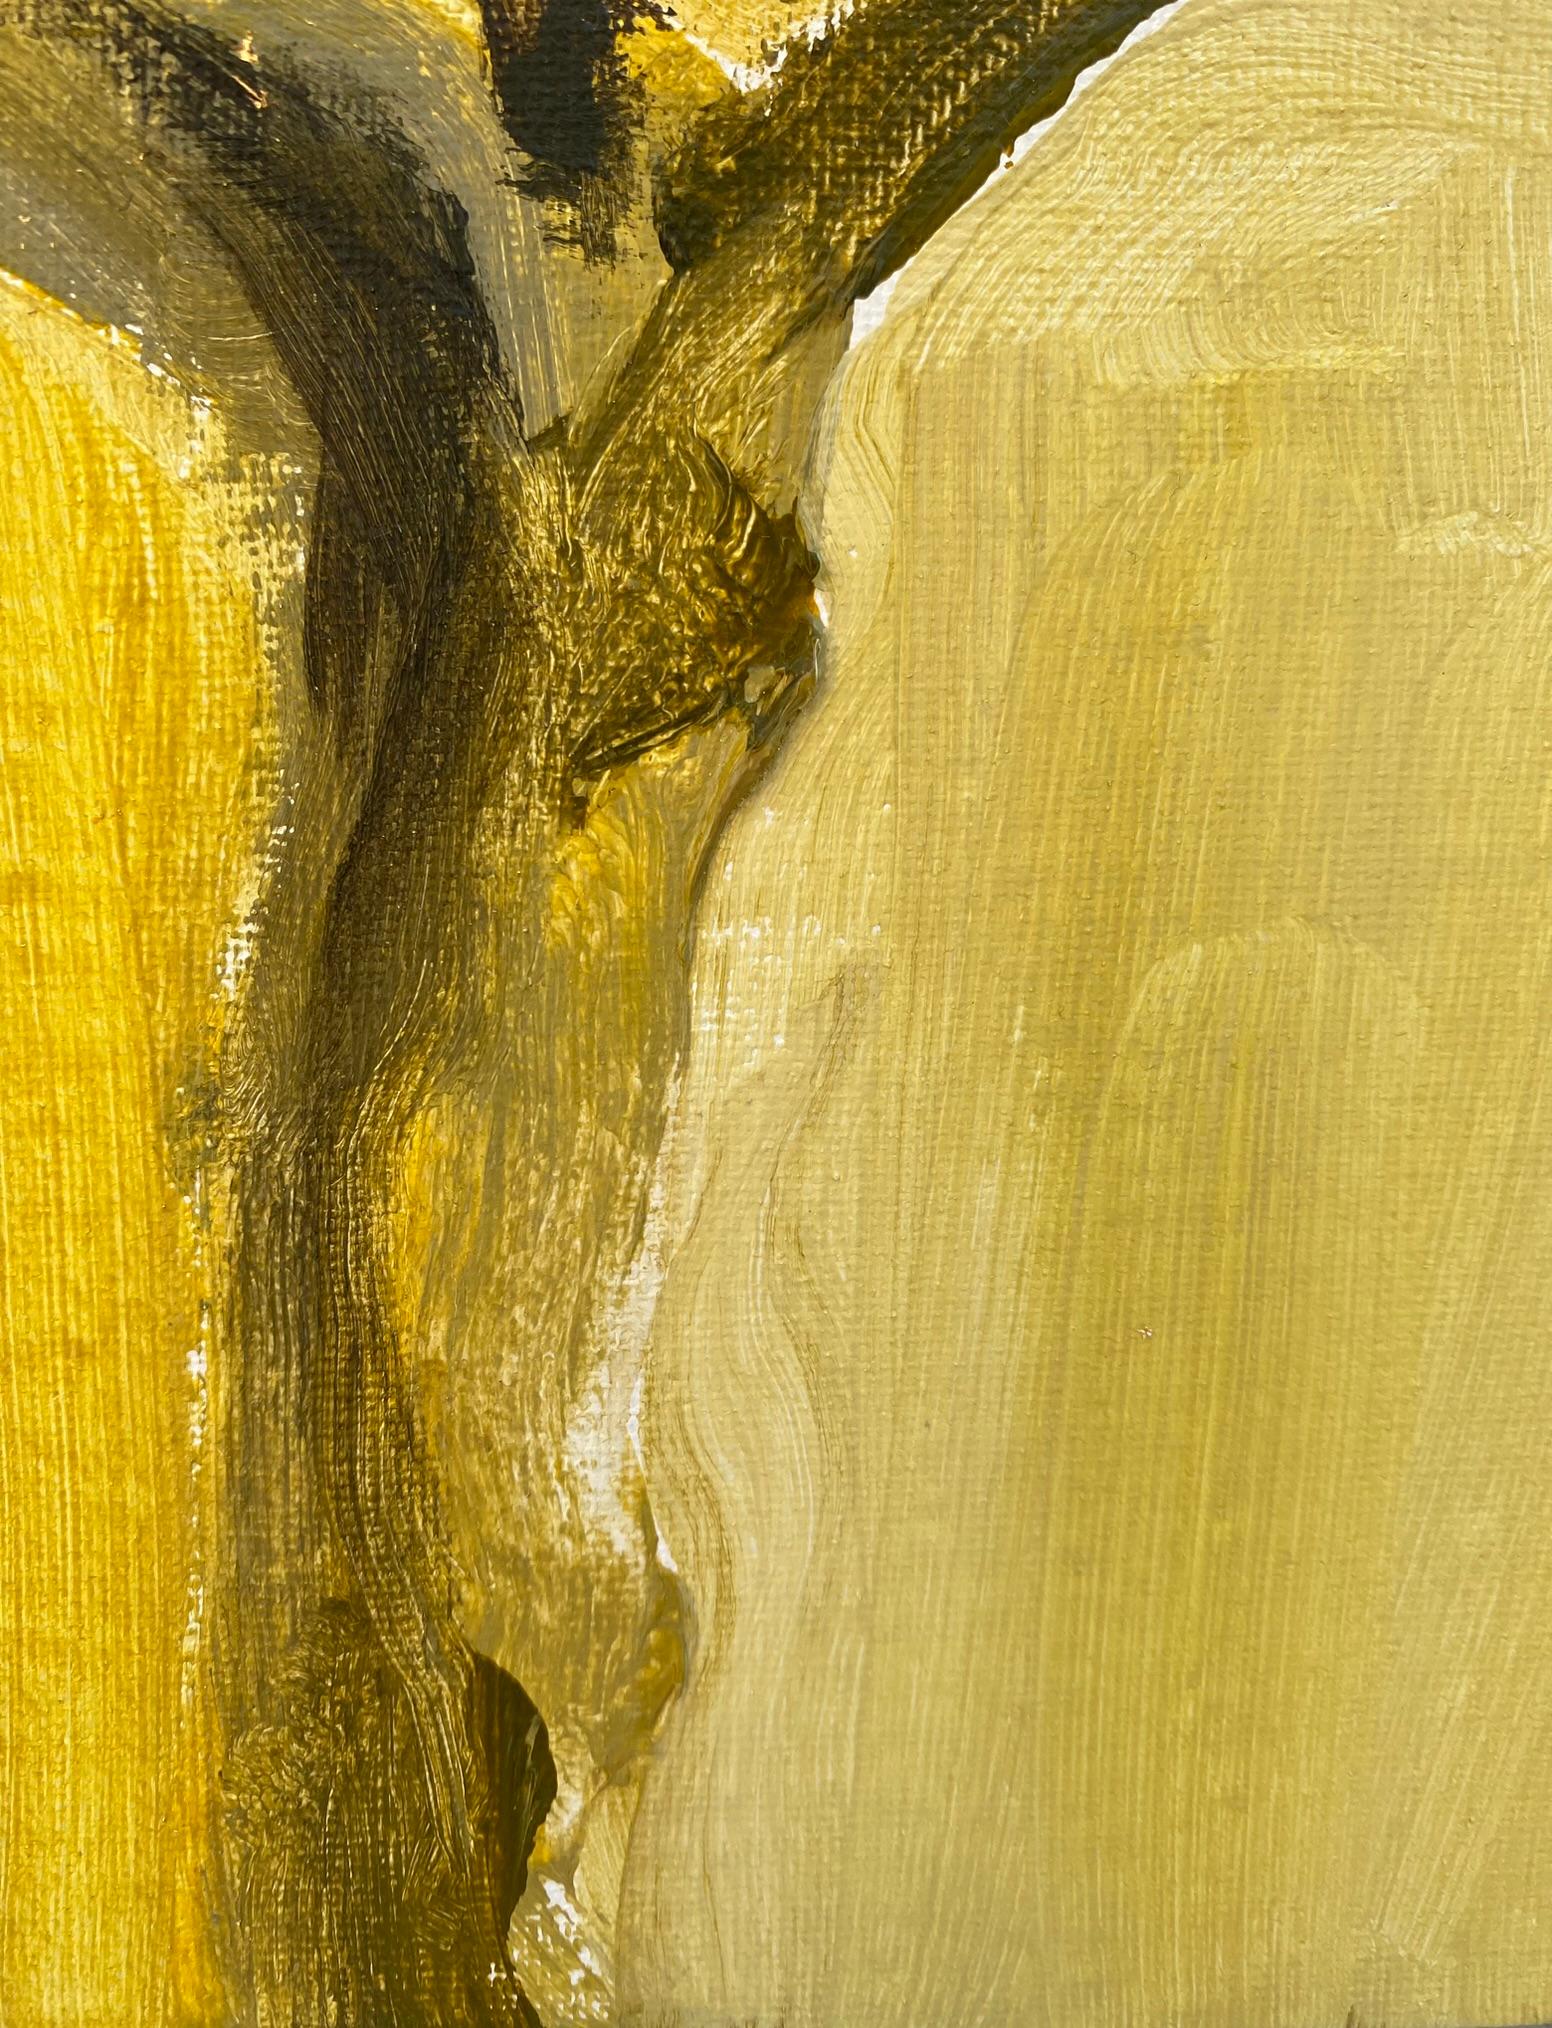 Original-Primary Yellow-Sunlit-Abstract-Expression-Gold Leaf-UK Awarded Artist 9